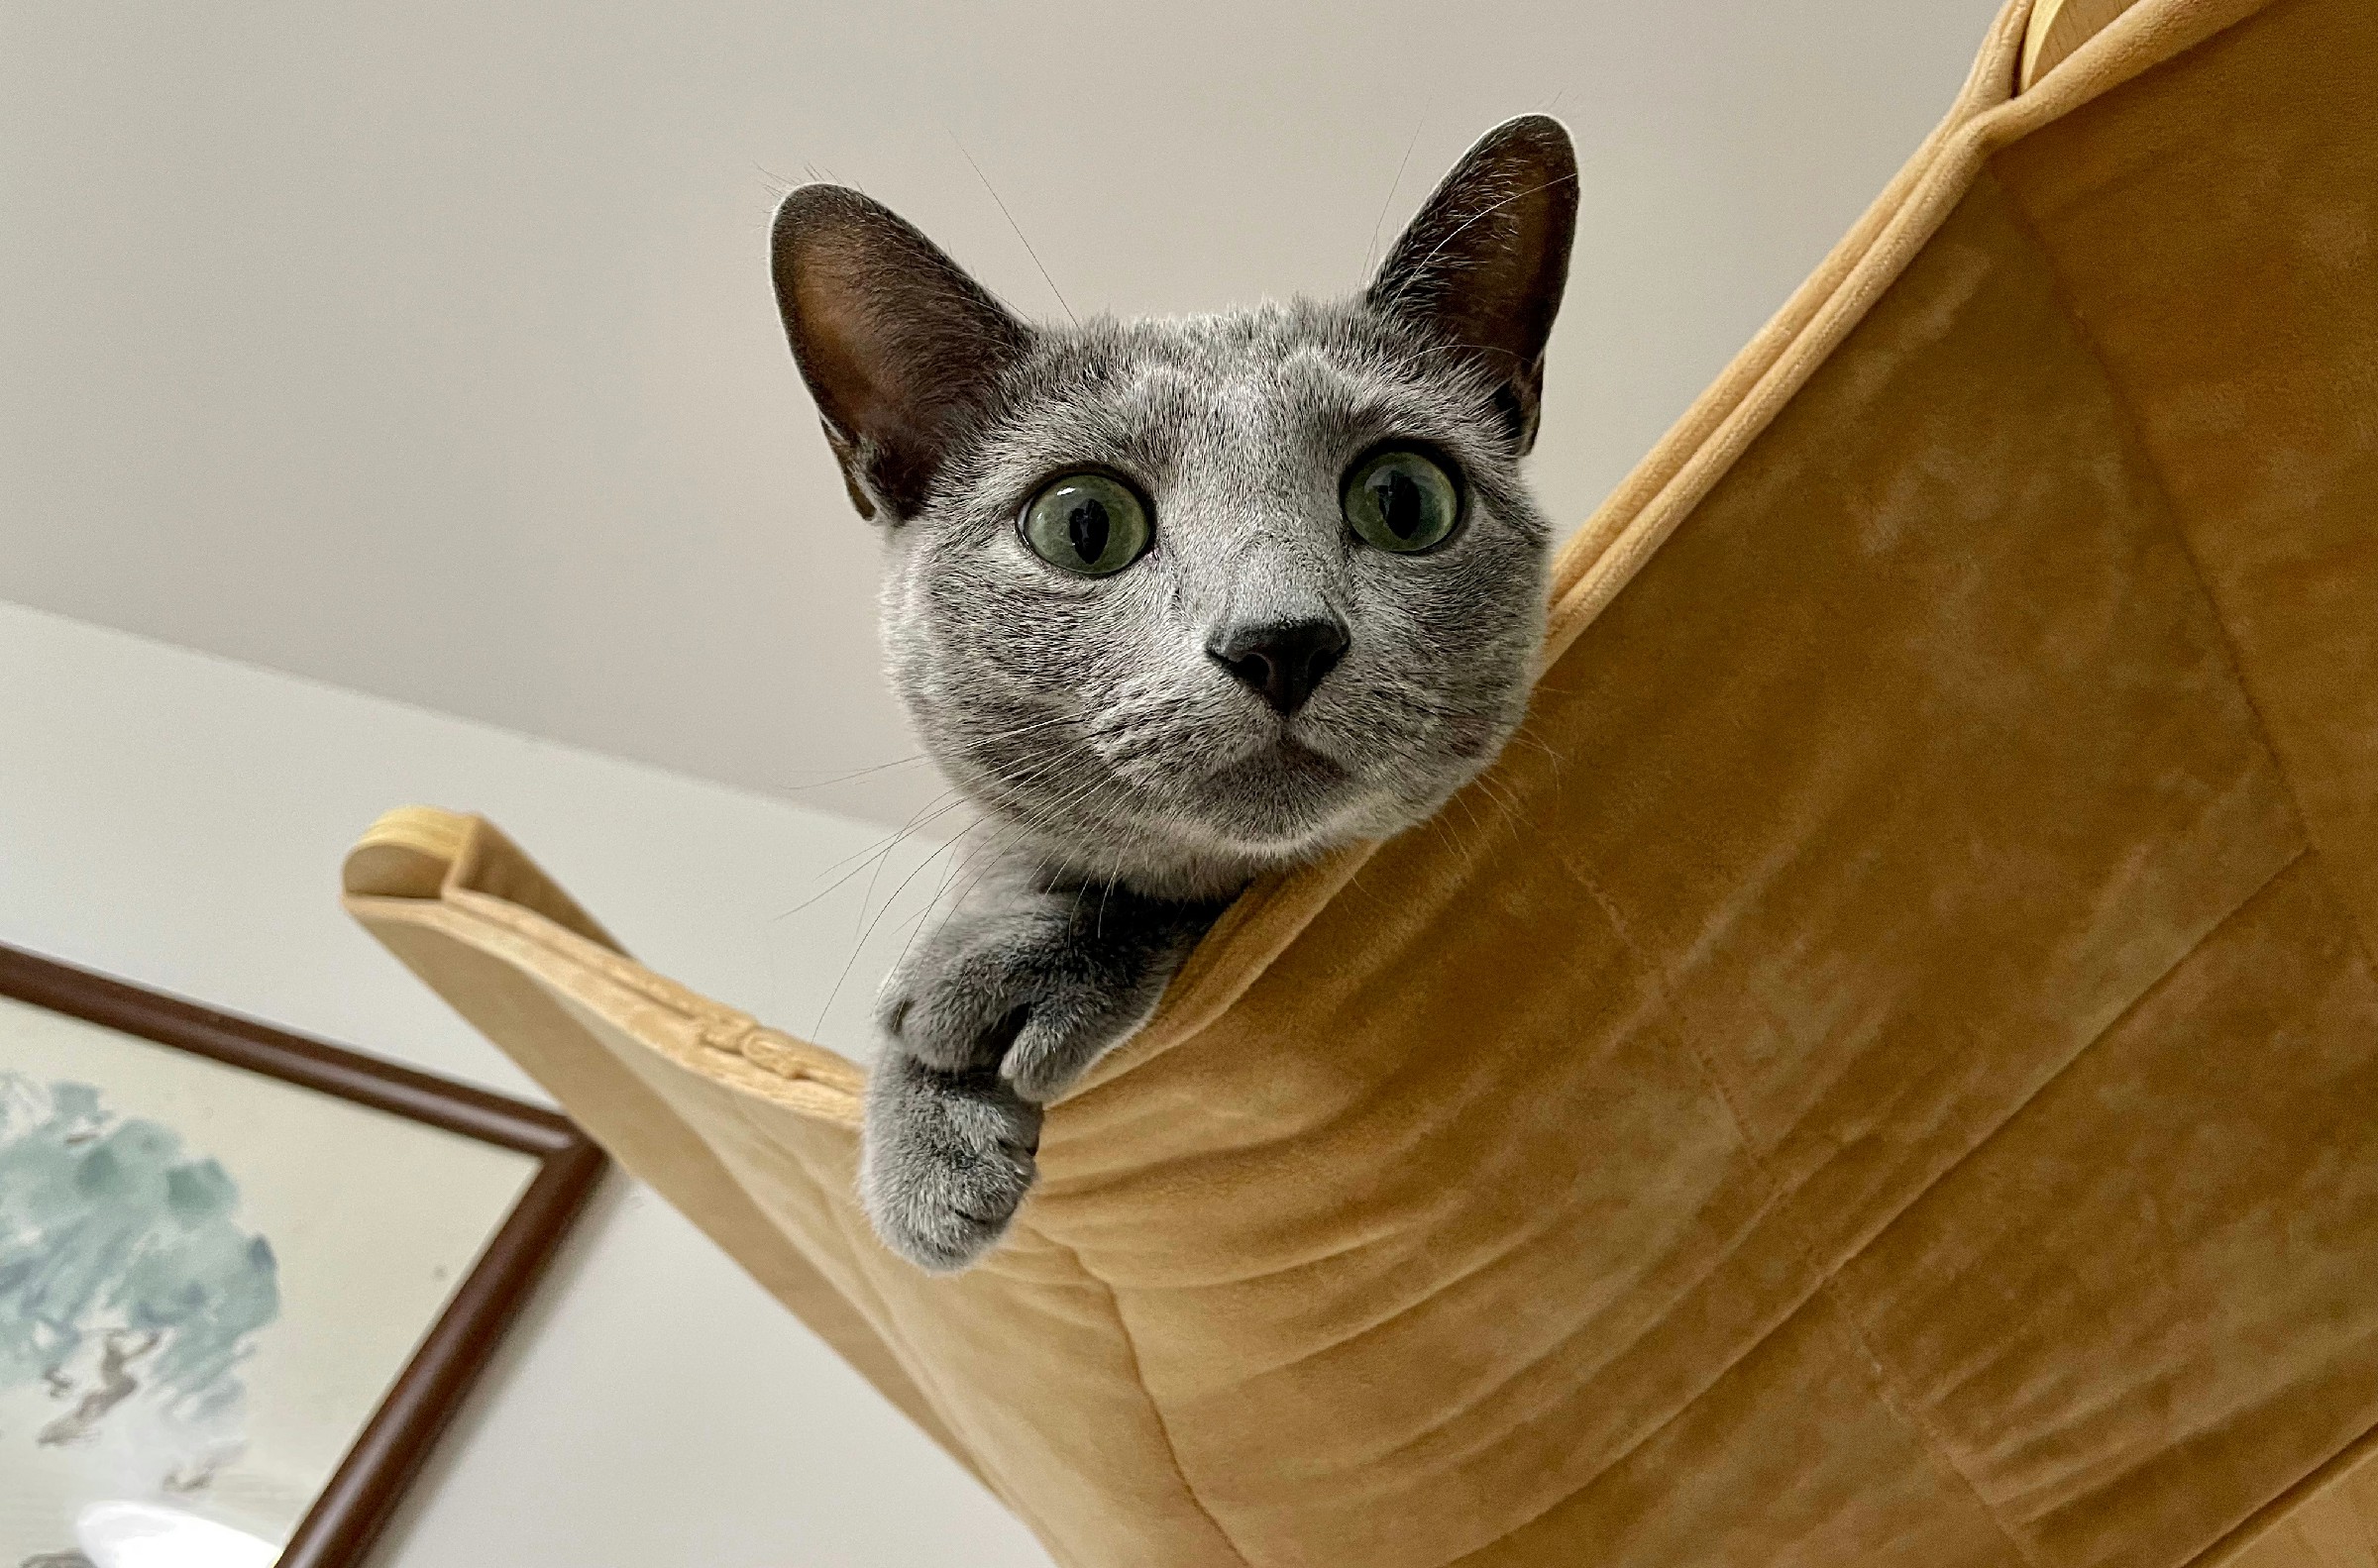 Why some cats jump higher than others?